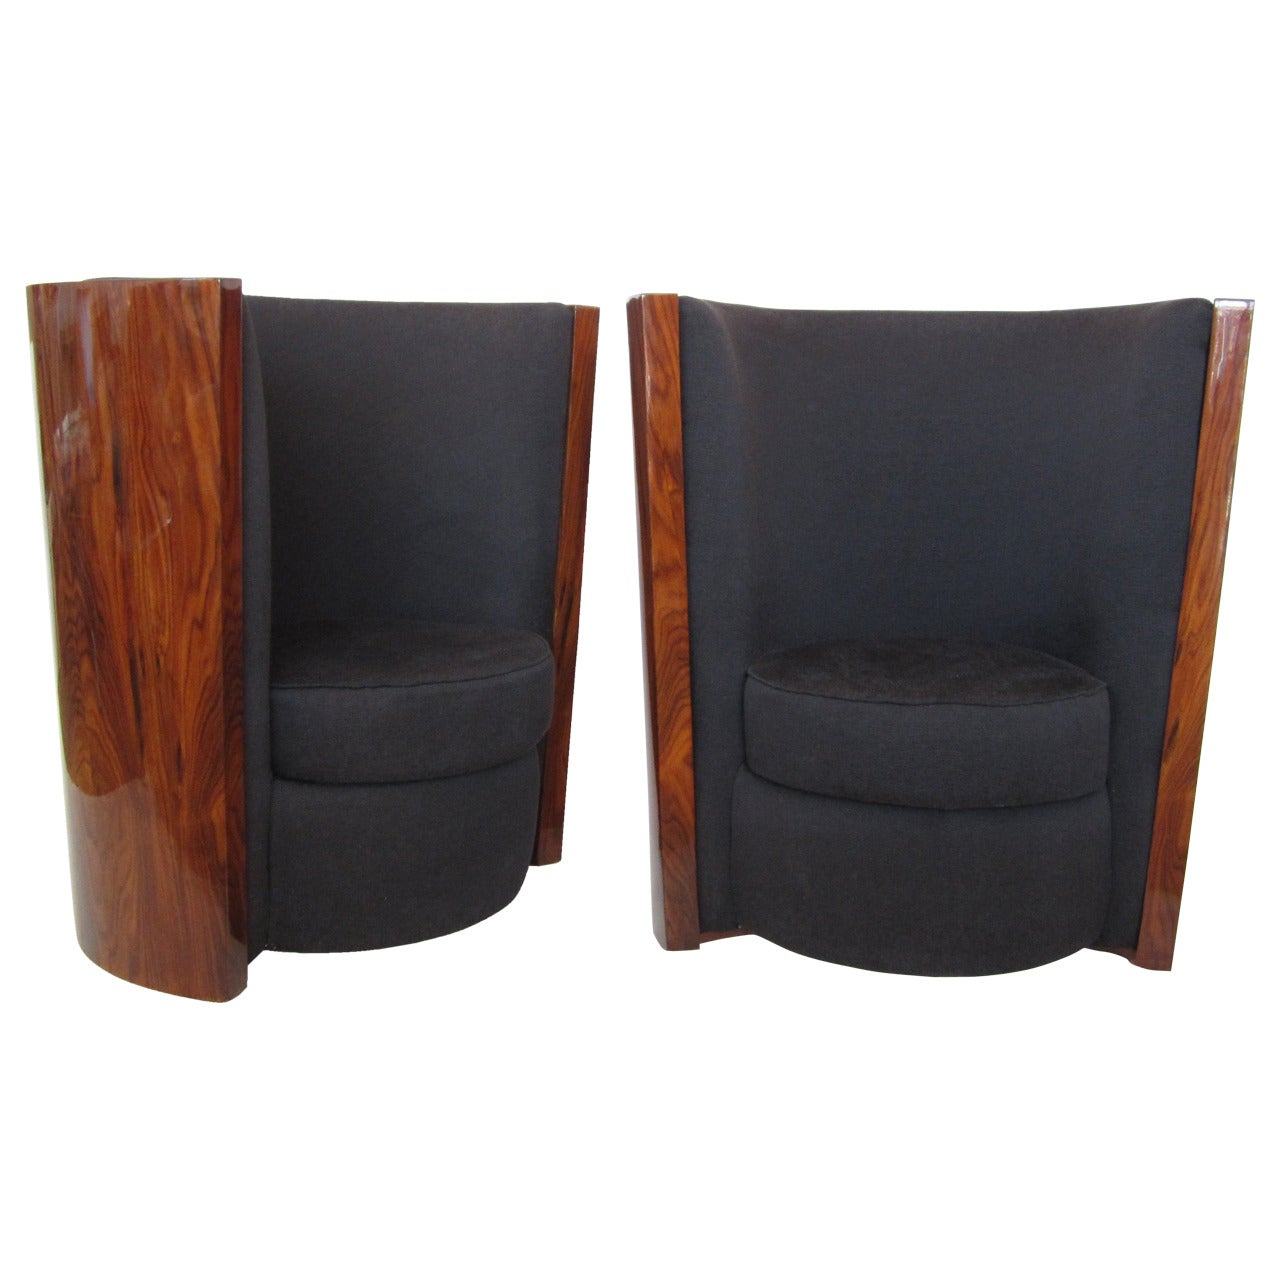 Pair of Curved High-Back Cherrywood Art Deco-style Chairs, Italy, 1950s For Sale